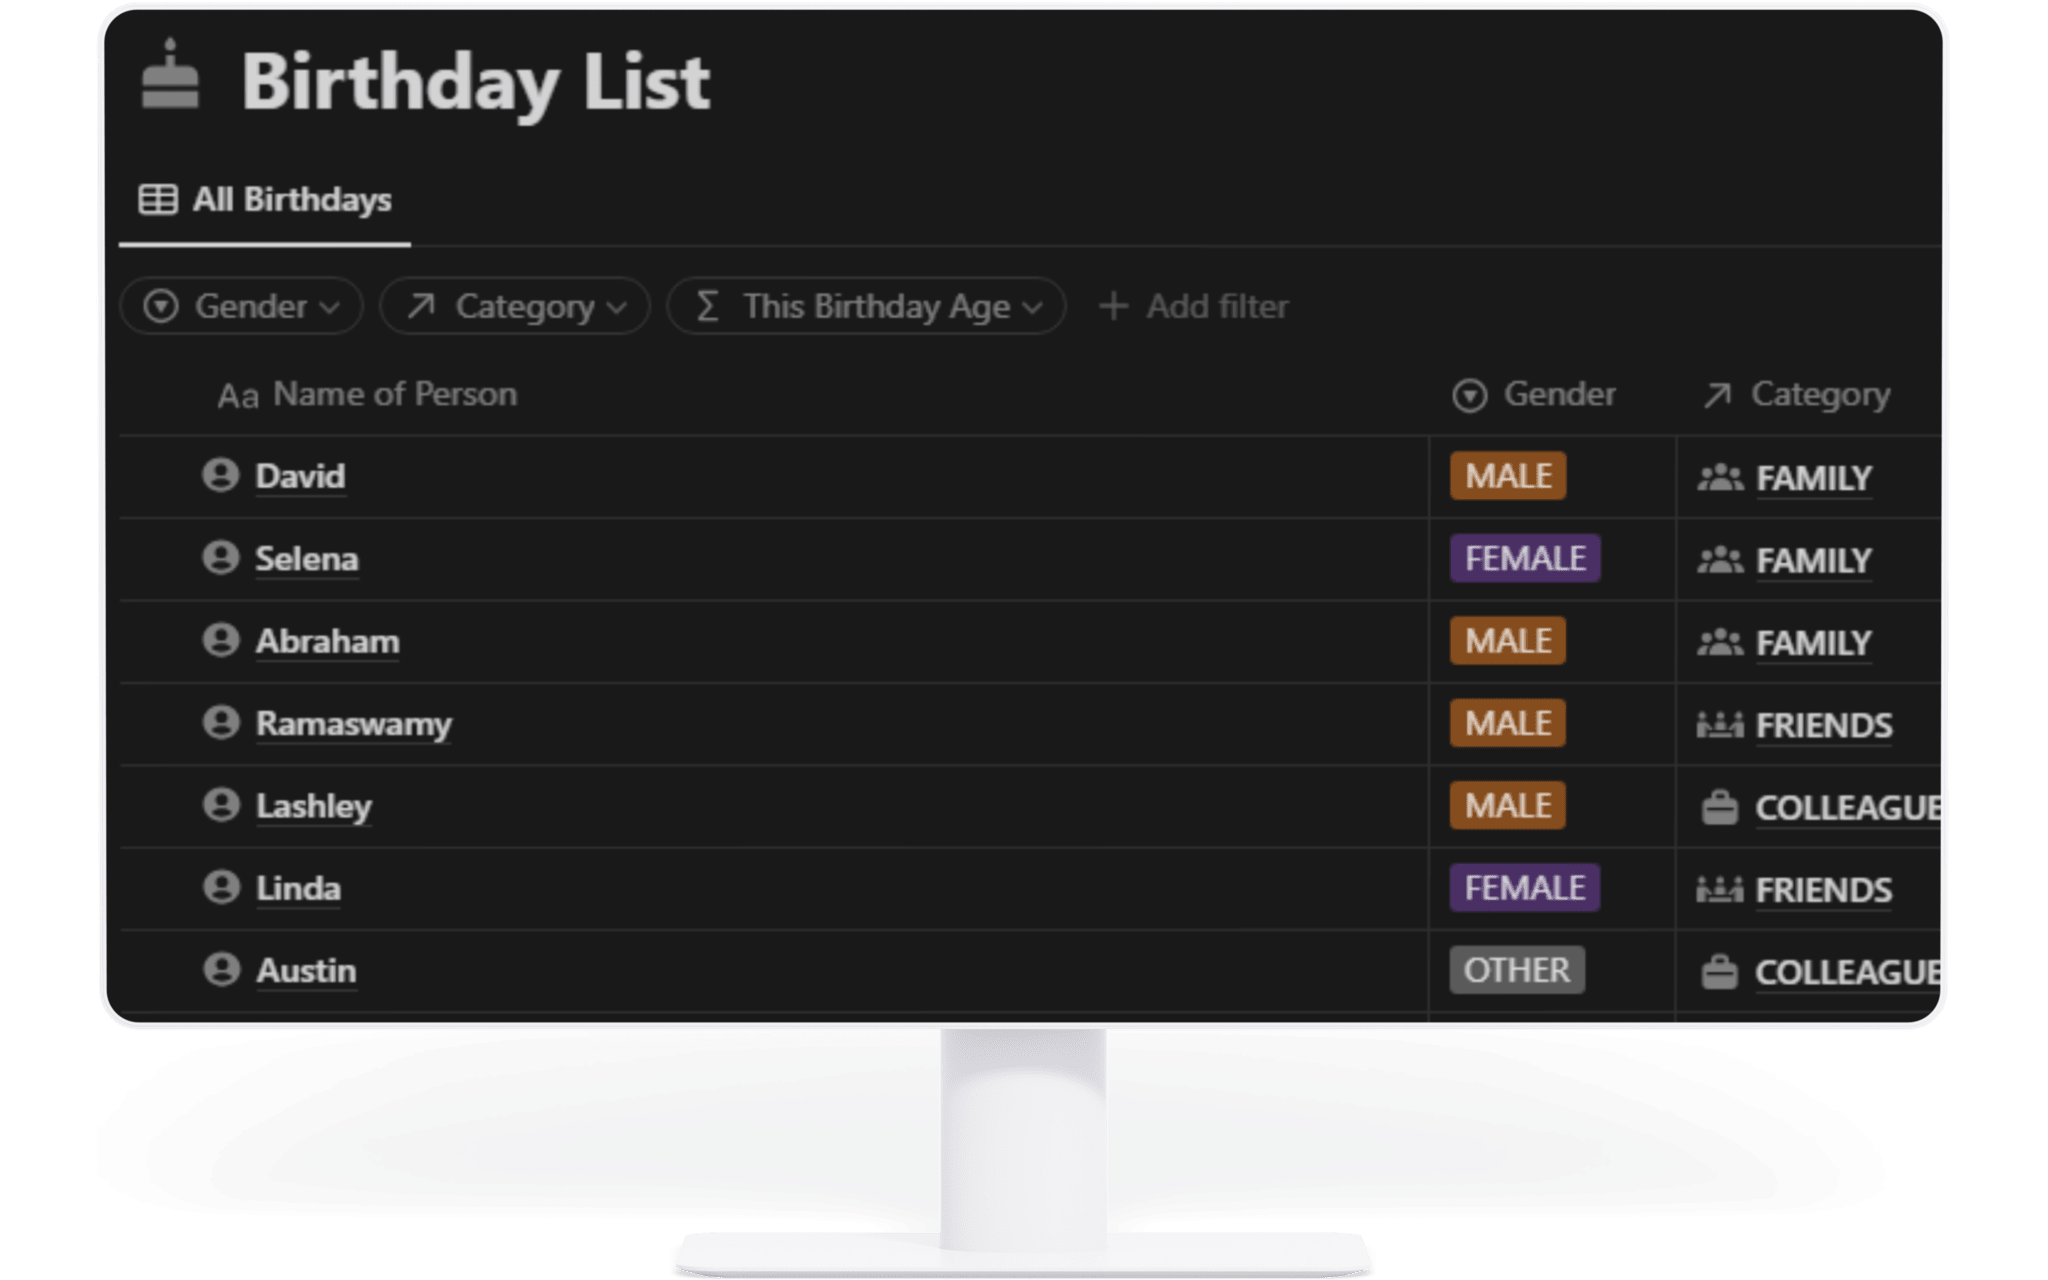 Wondering how to track birthdays in notion? No worries this birthday tracker will help you do just that! Never forget a birthday again! Birthday Tracker keeps all your important dates in one convenient place.